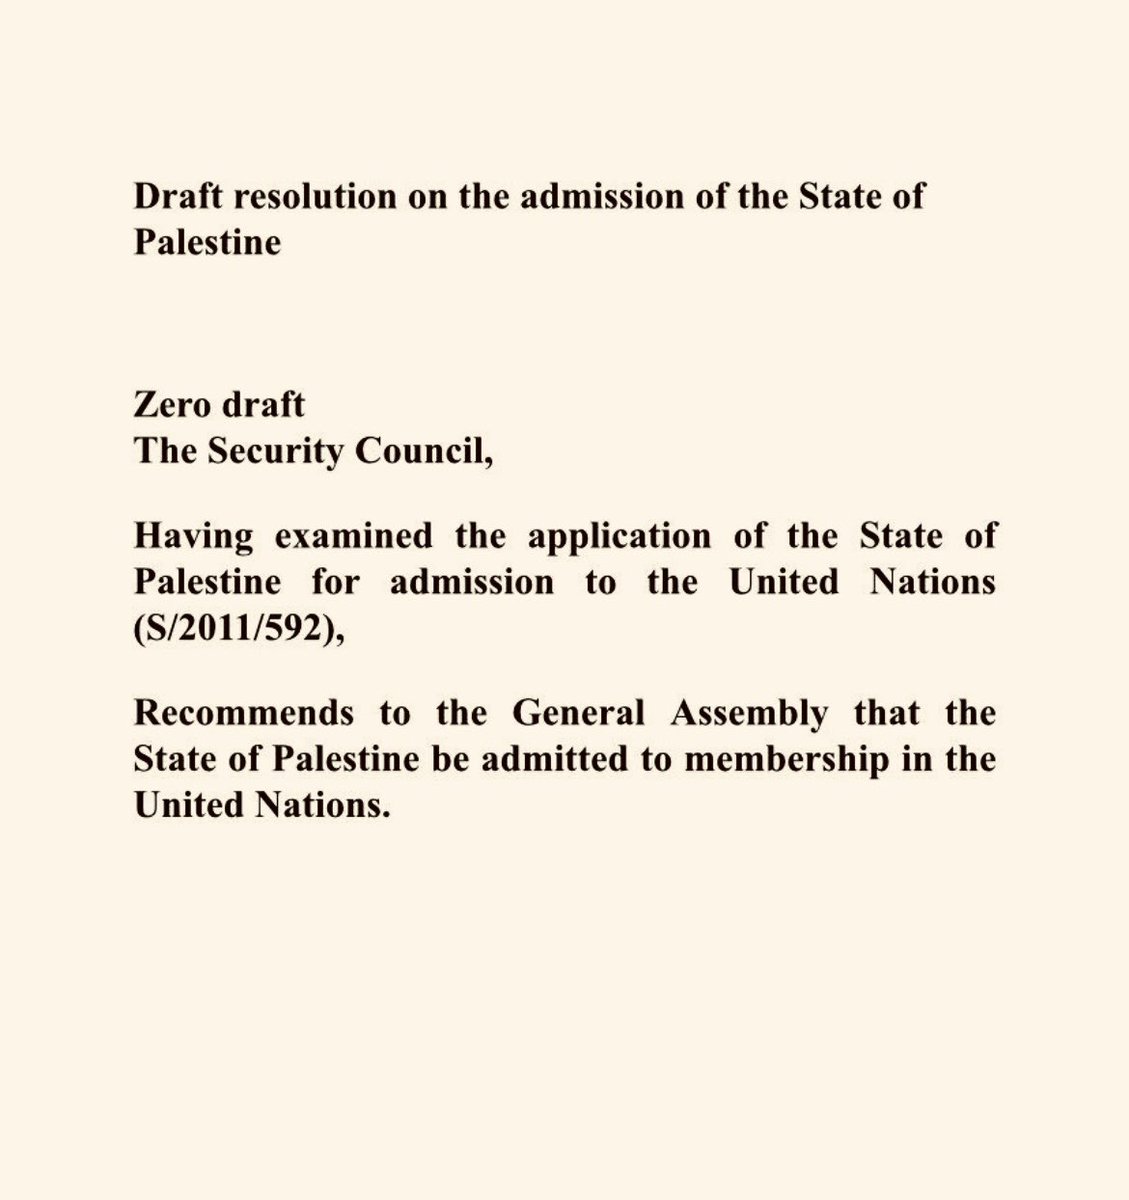 Draft resolution on the State of Palestine membership to the United Nations put in blue by @AlgeriaUN on behalf of the Arab Group 🇵🇸🇺🇳